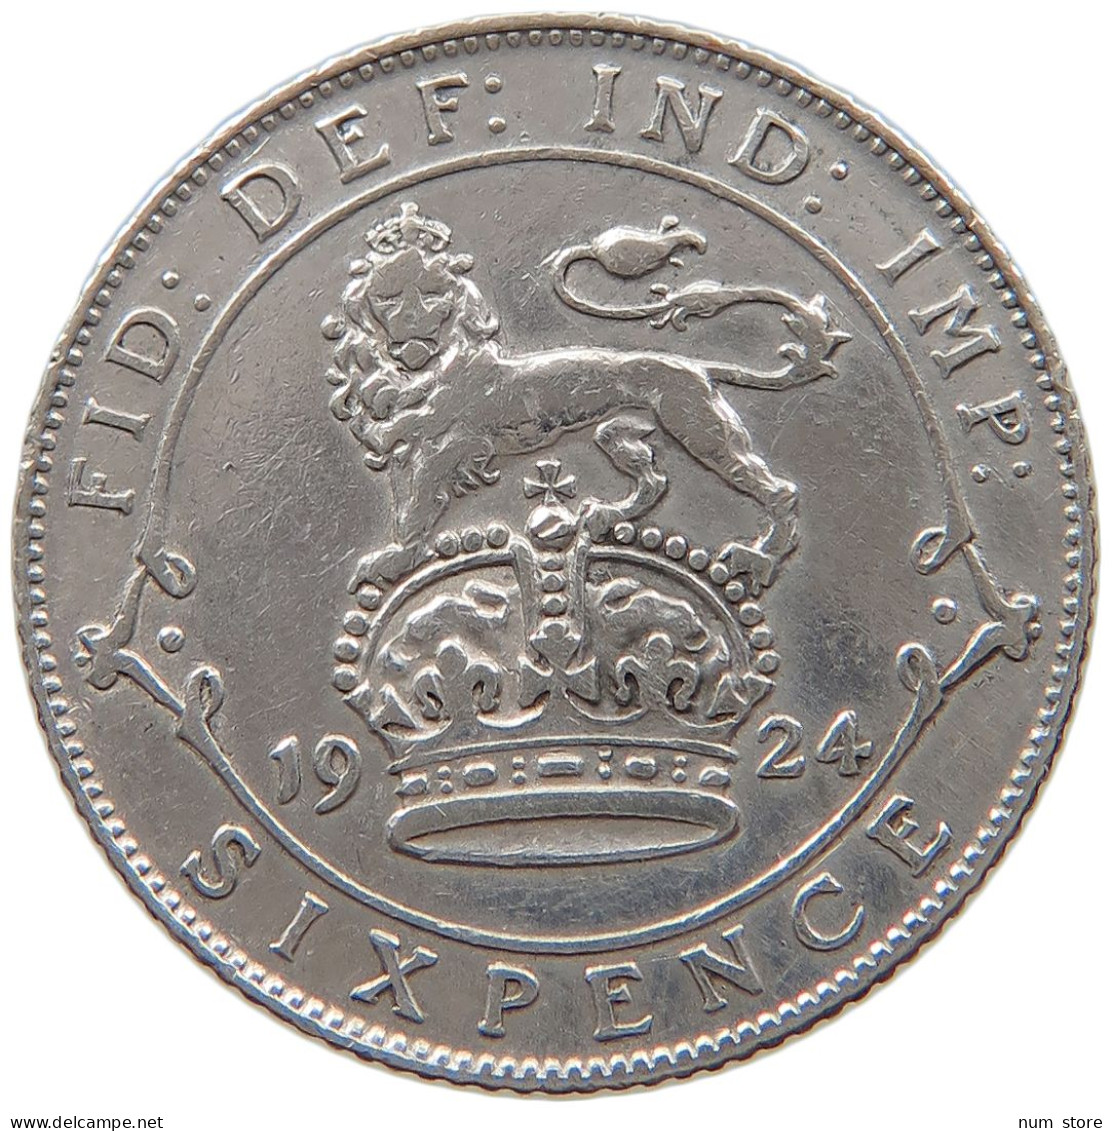 GREAT BRITAIN SIXPENCE 1924 #s101 0129 - H. 6 Pence